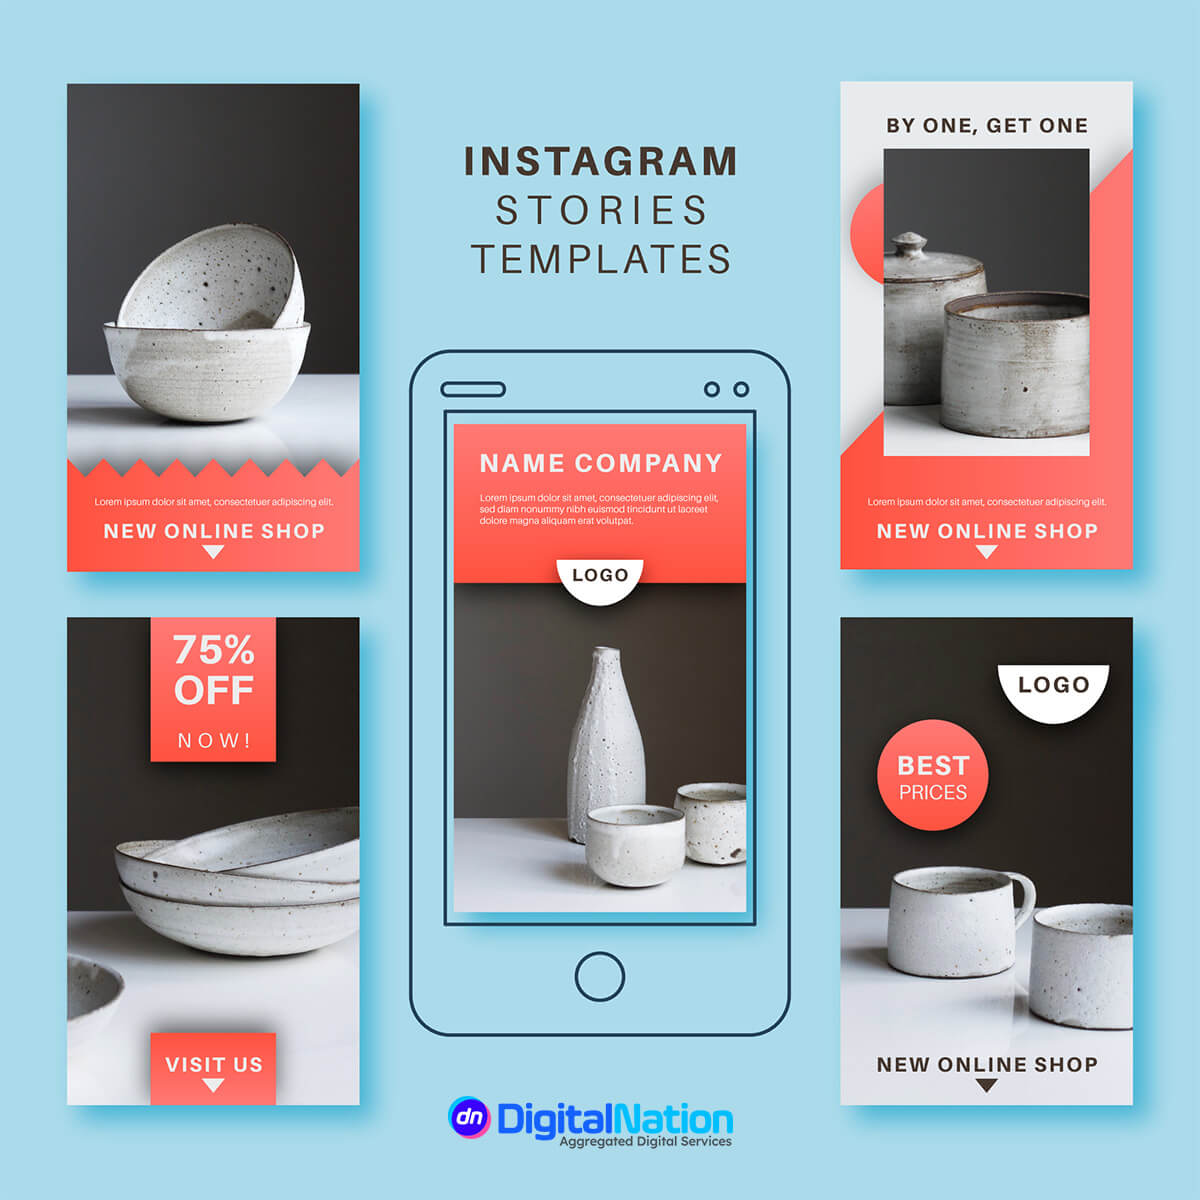 Digital Nation's engaging Instagram posts showcasing customer products and services.